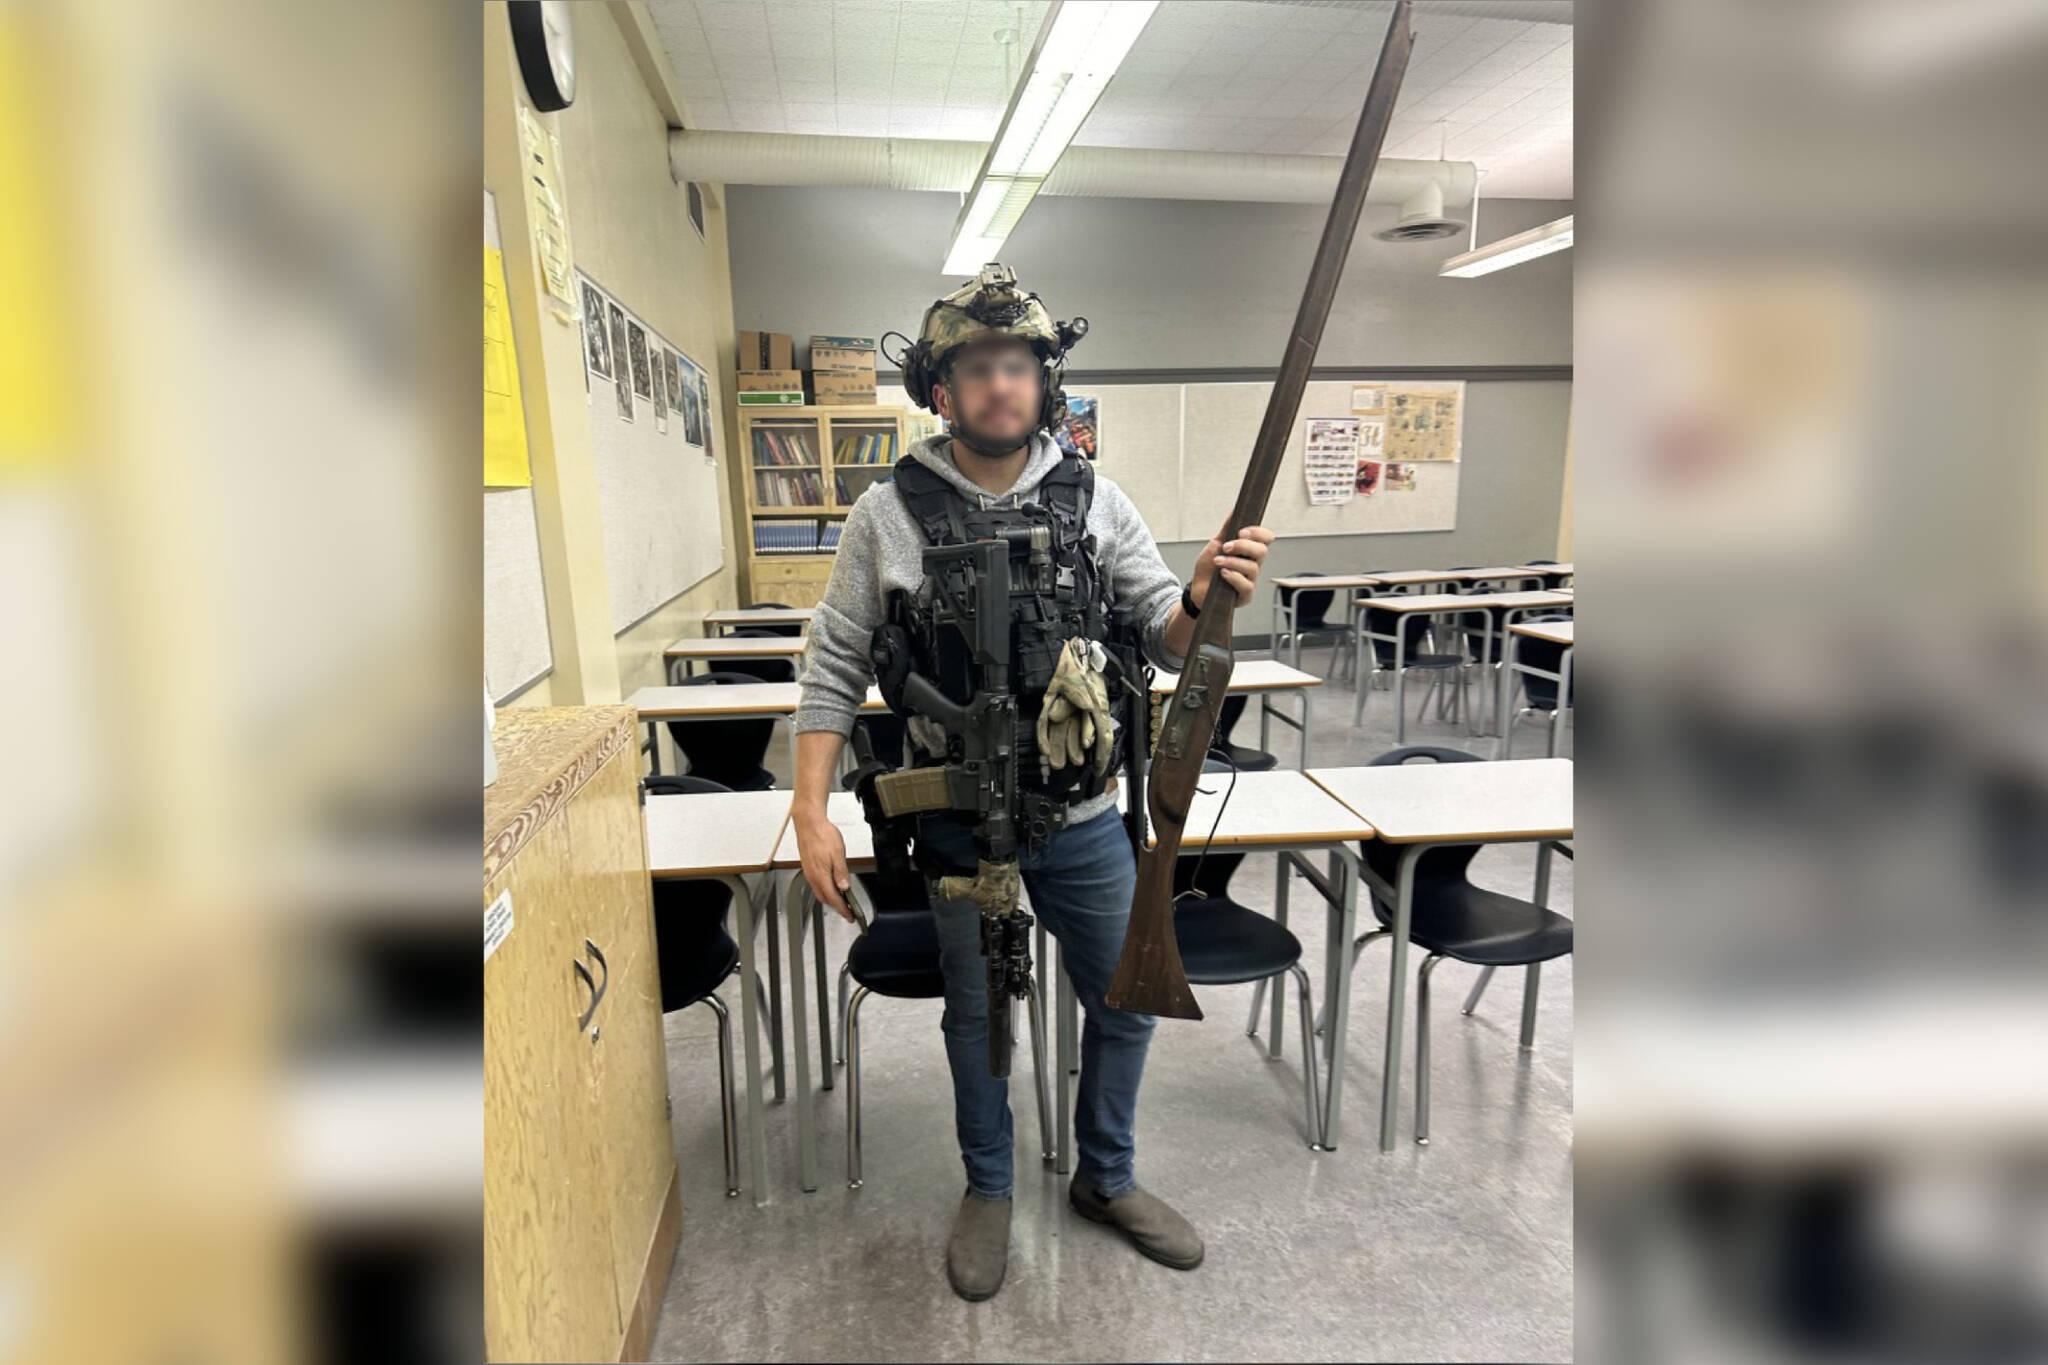 Vancouver Police seized a vintage firearm, pictured, at Lord Byng Secondary School Dec. 21, 2023 after a man was seen carrying it into the school. The man is a staff member at the school and was bringing it in for a school presentation, police said. (Vancouver police handout)